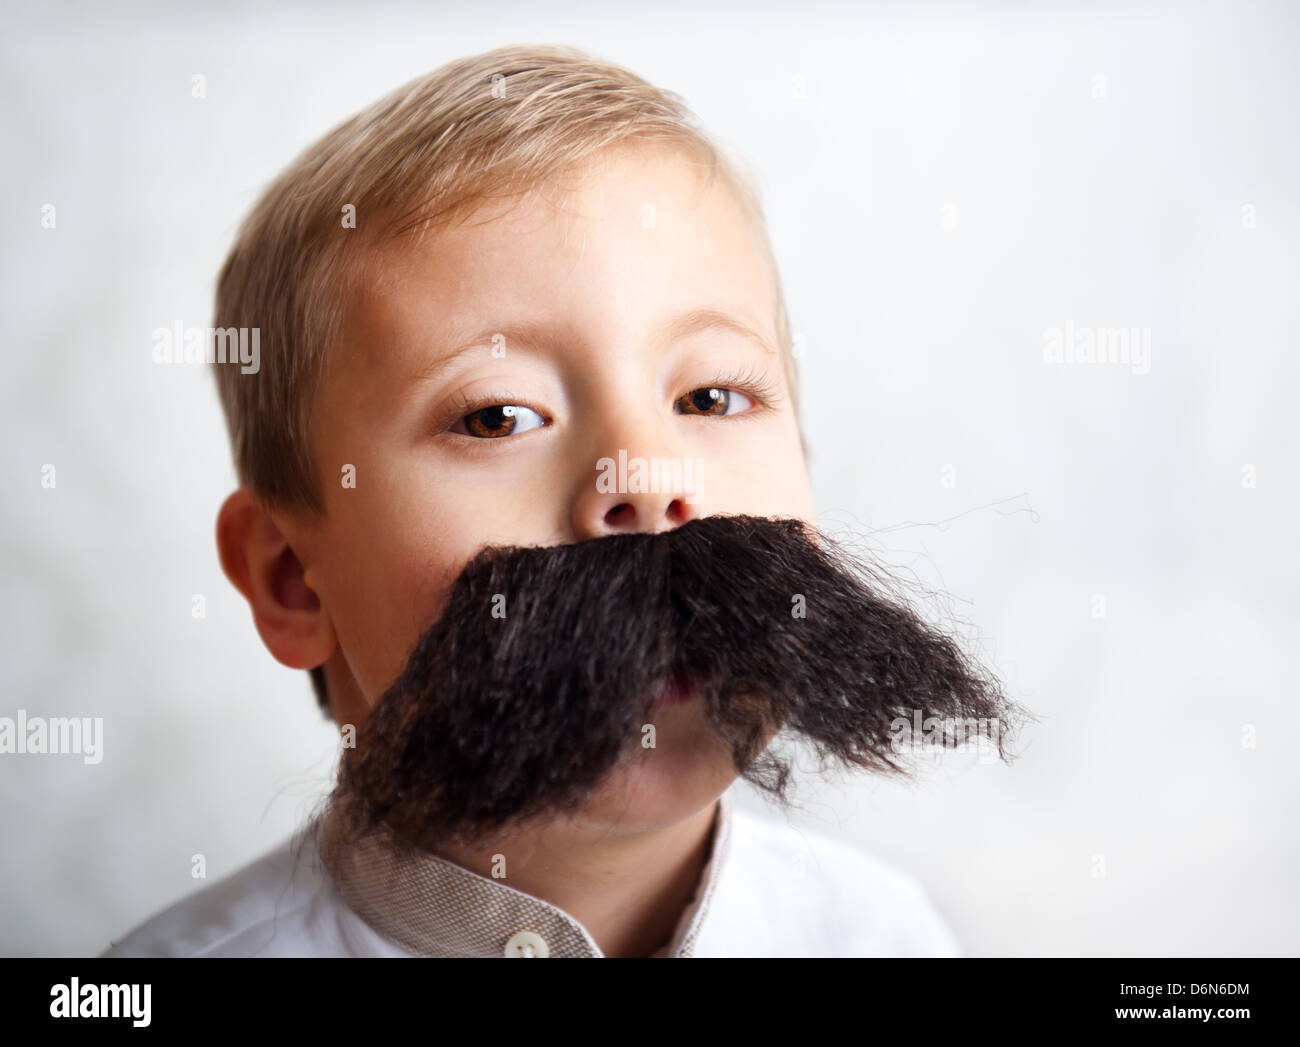 The little boy with a big mustache Stock Photo